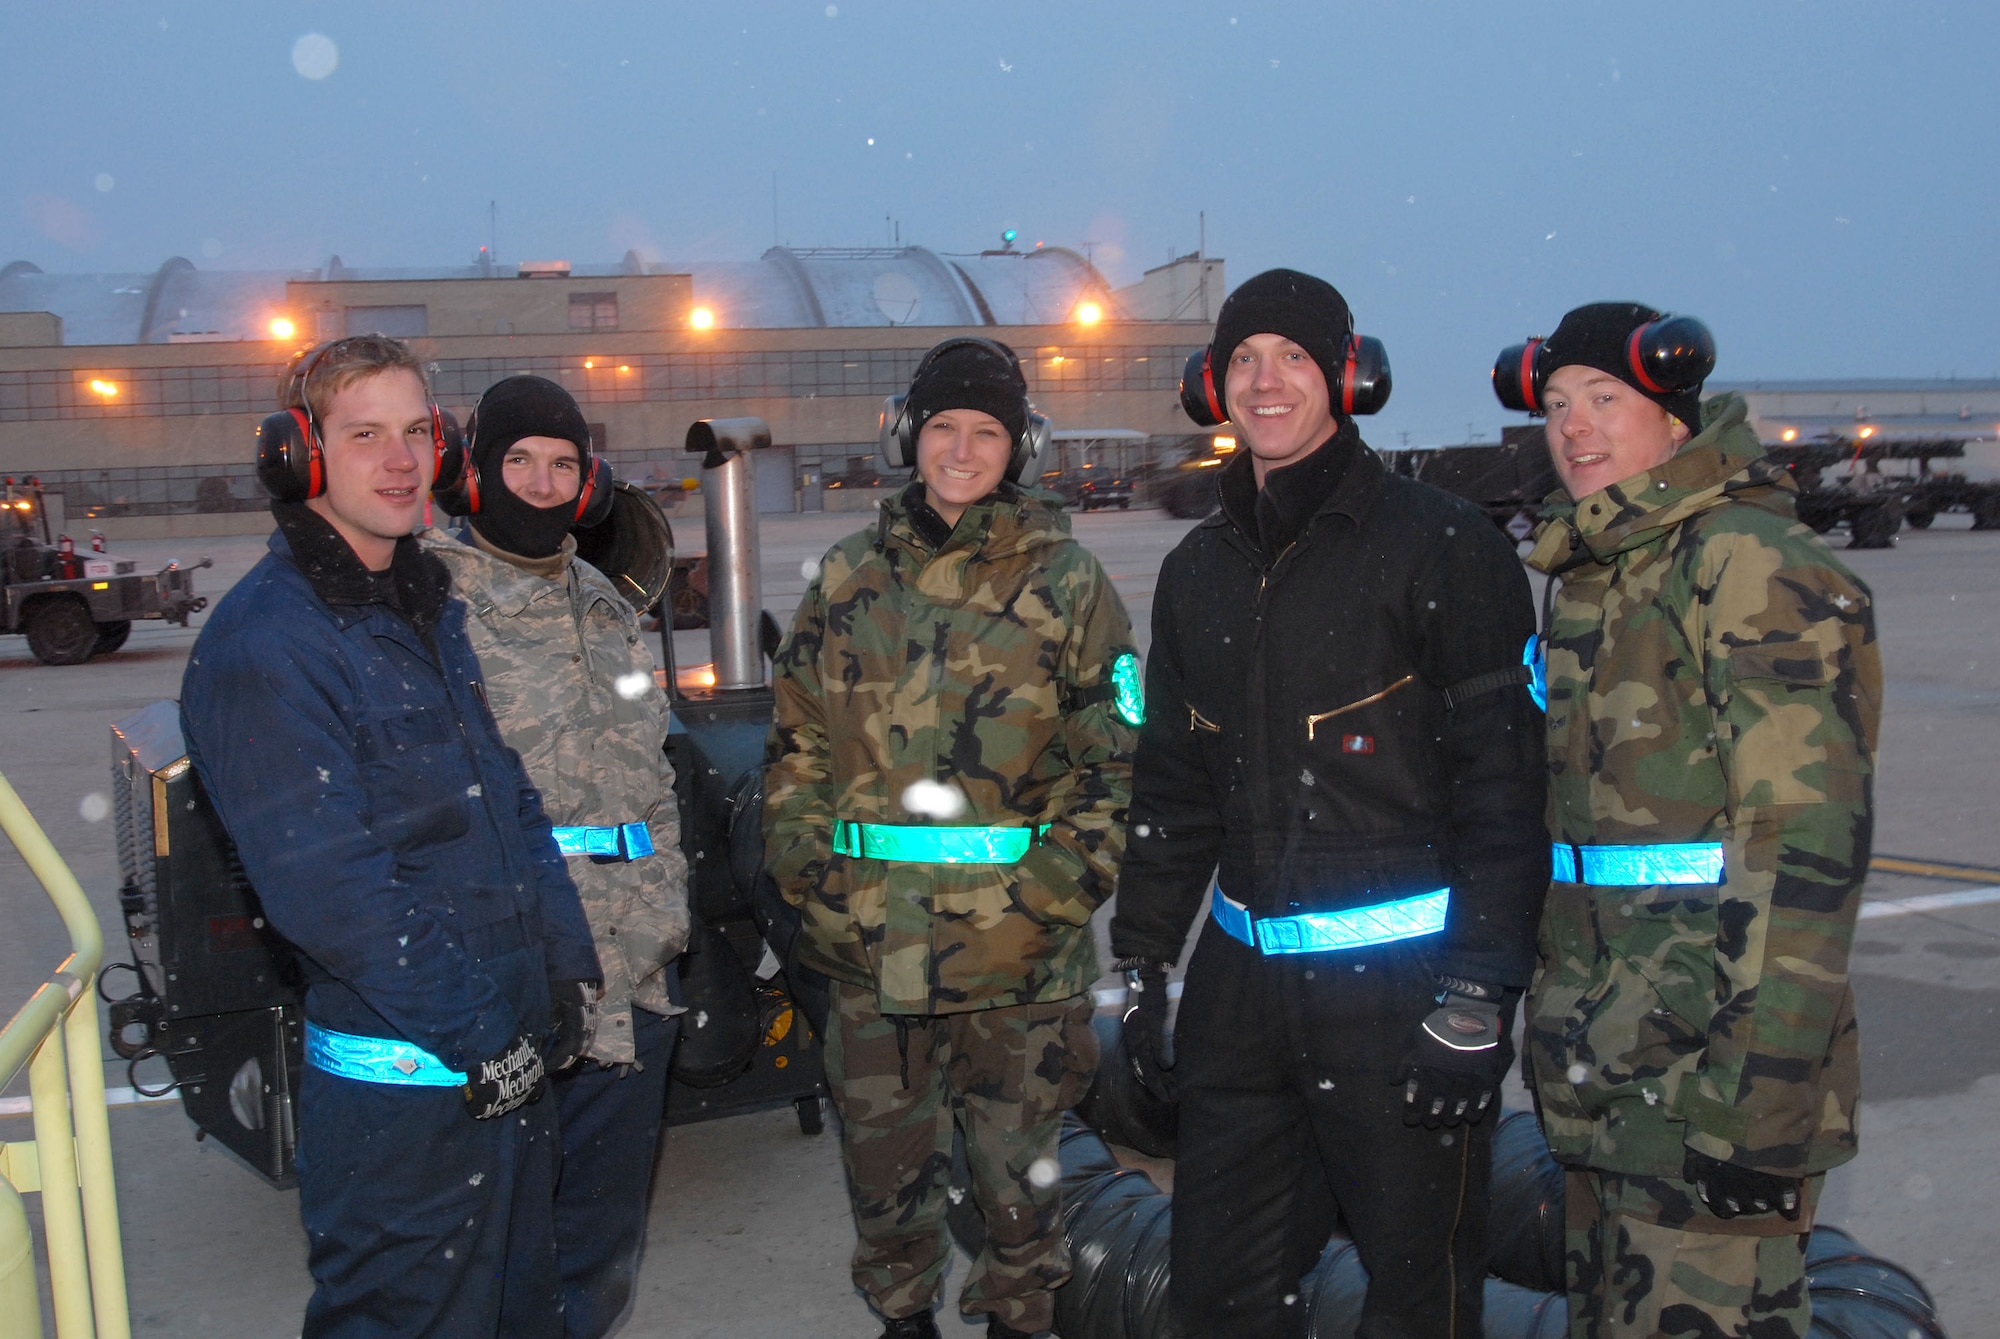 Crew Cheifs (from left to right) SrA Jeffrey Perizzolo, A1C Austin Smith, SrA Anne Kollar, SrA Jared Phillips, and SrA Travis Tanner brave the cold and snowy conditions while working on the flightline during the 140th Wing's Phase 1 Operational Readiness Inspection.  Photo by: SMSgt John Rohrer; 140th Wing Public Affairs.